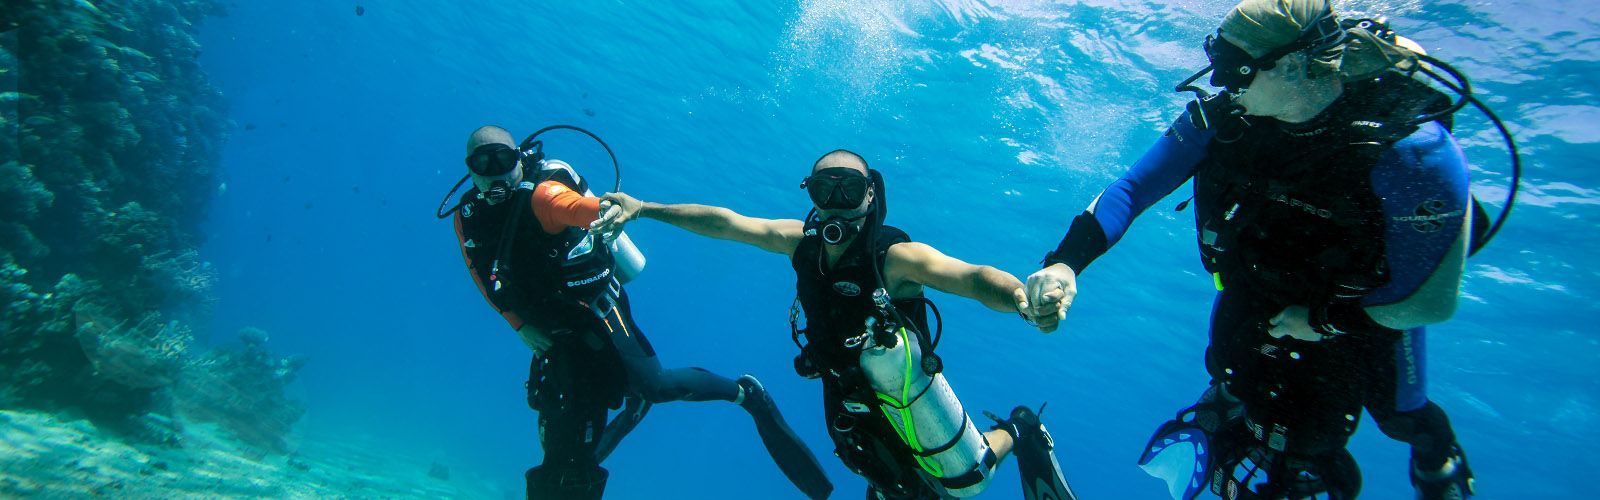 Welcome to Scuba World Divers in El Gouna!'s Courses